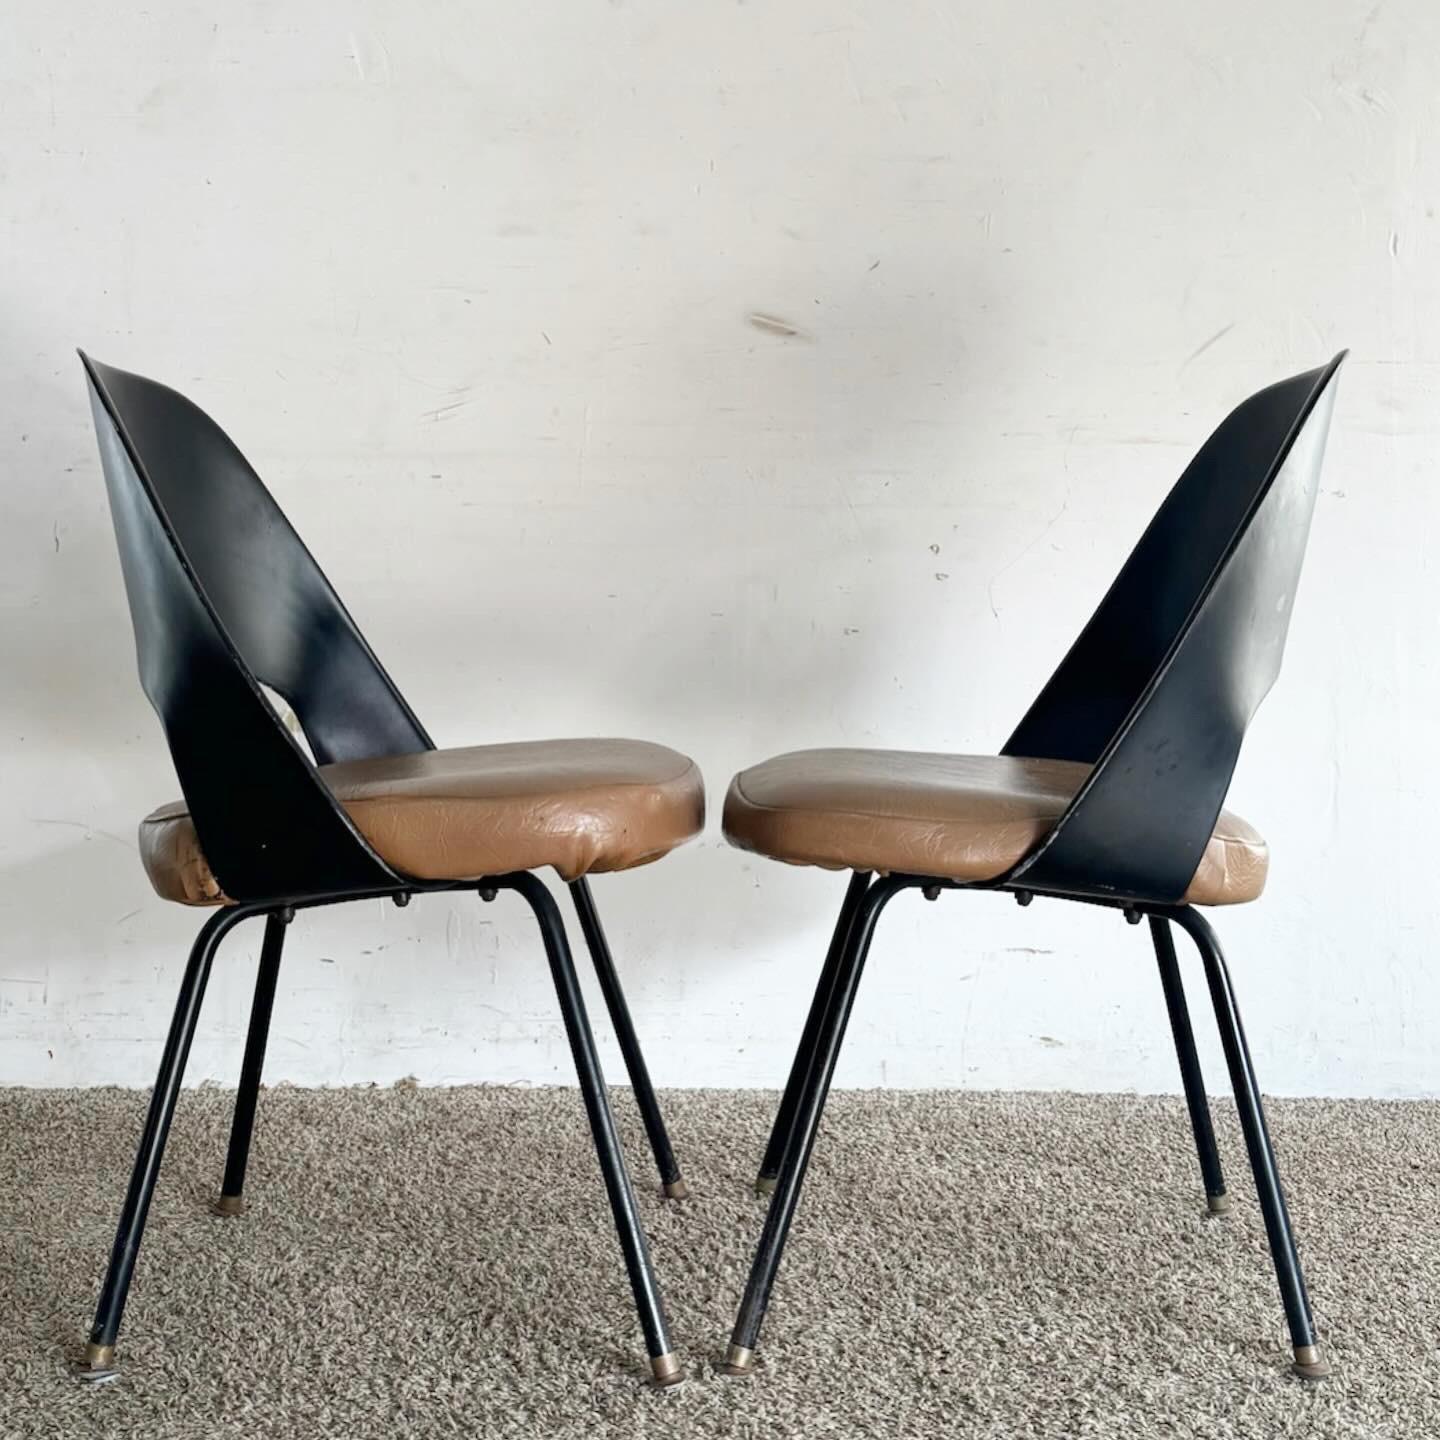 Mid Century Modern Eero Saarinen Model 42 Style Dining Chairs - Set of 4 In Good Condition For Sale In Delray Beach, FL